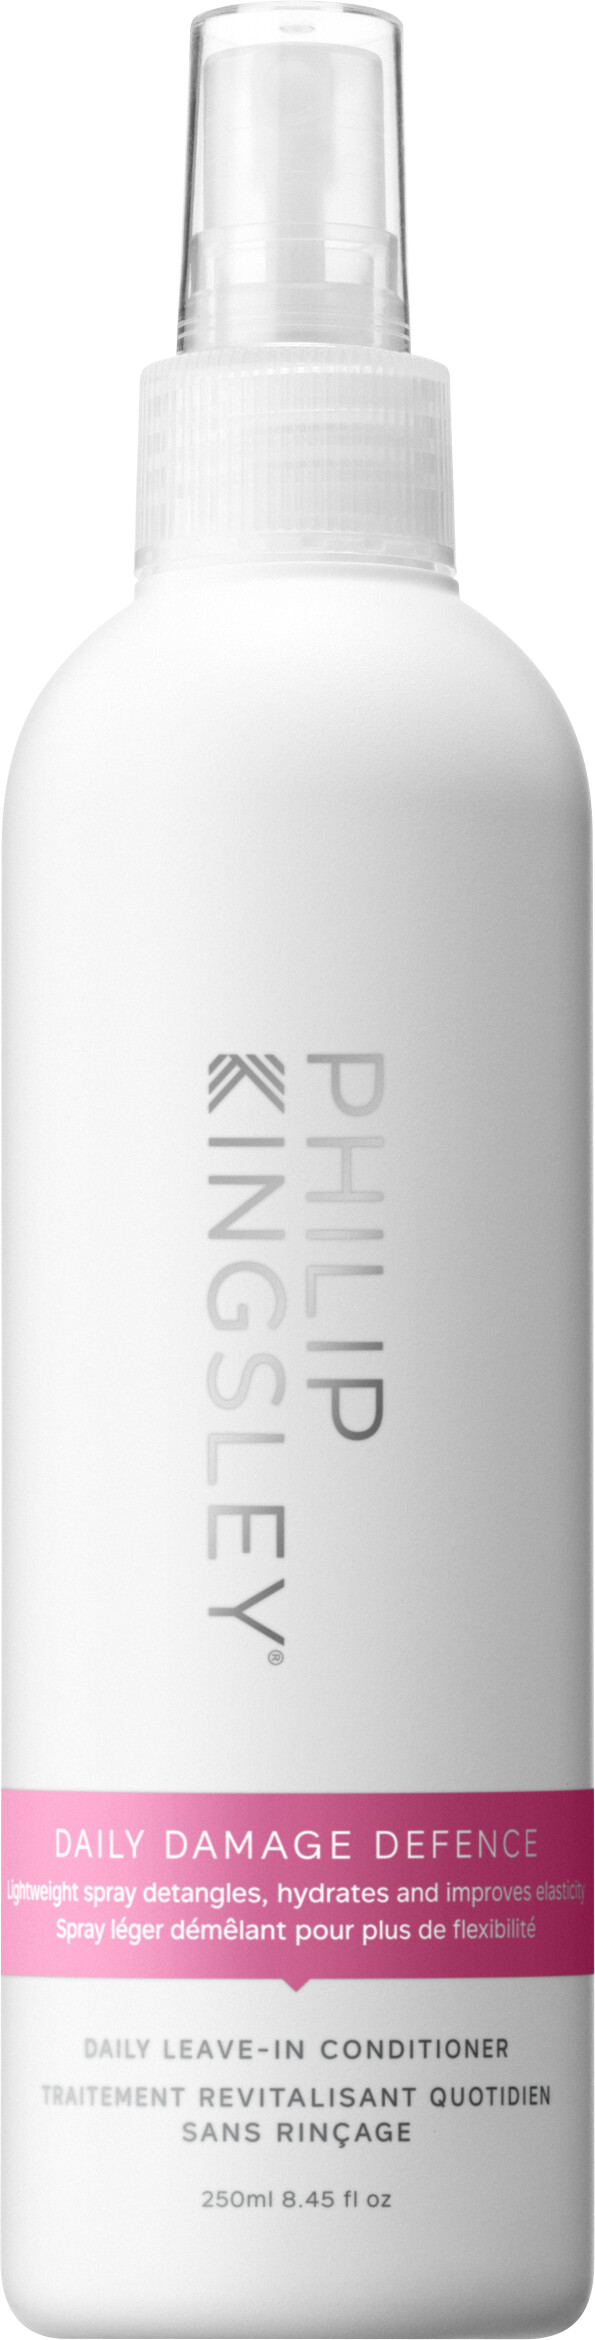 Philip Kingsley Daily Damage Defence Daily Leave-In Conditioner 250ml